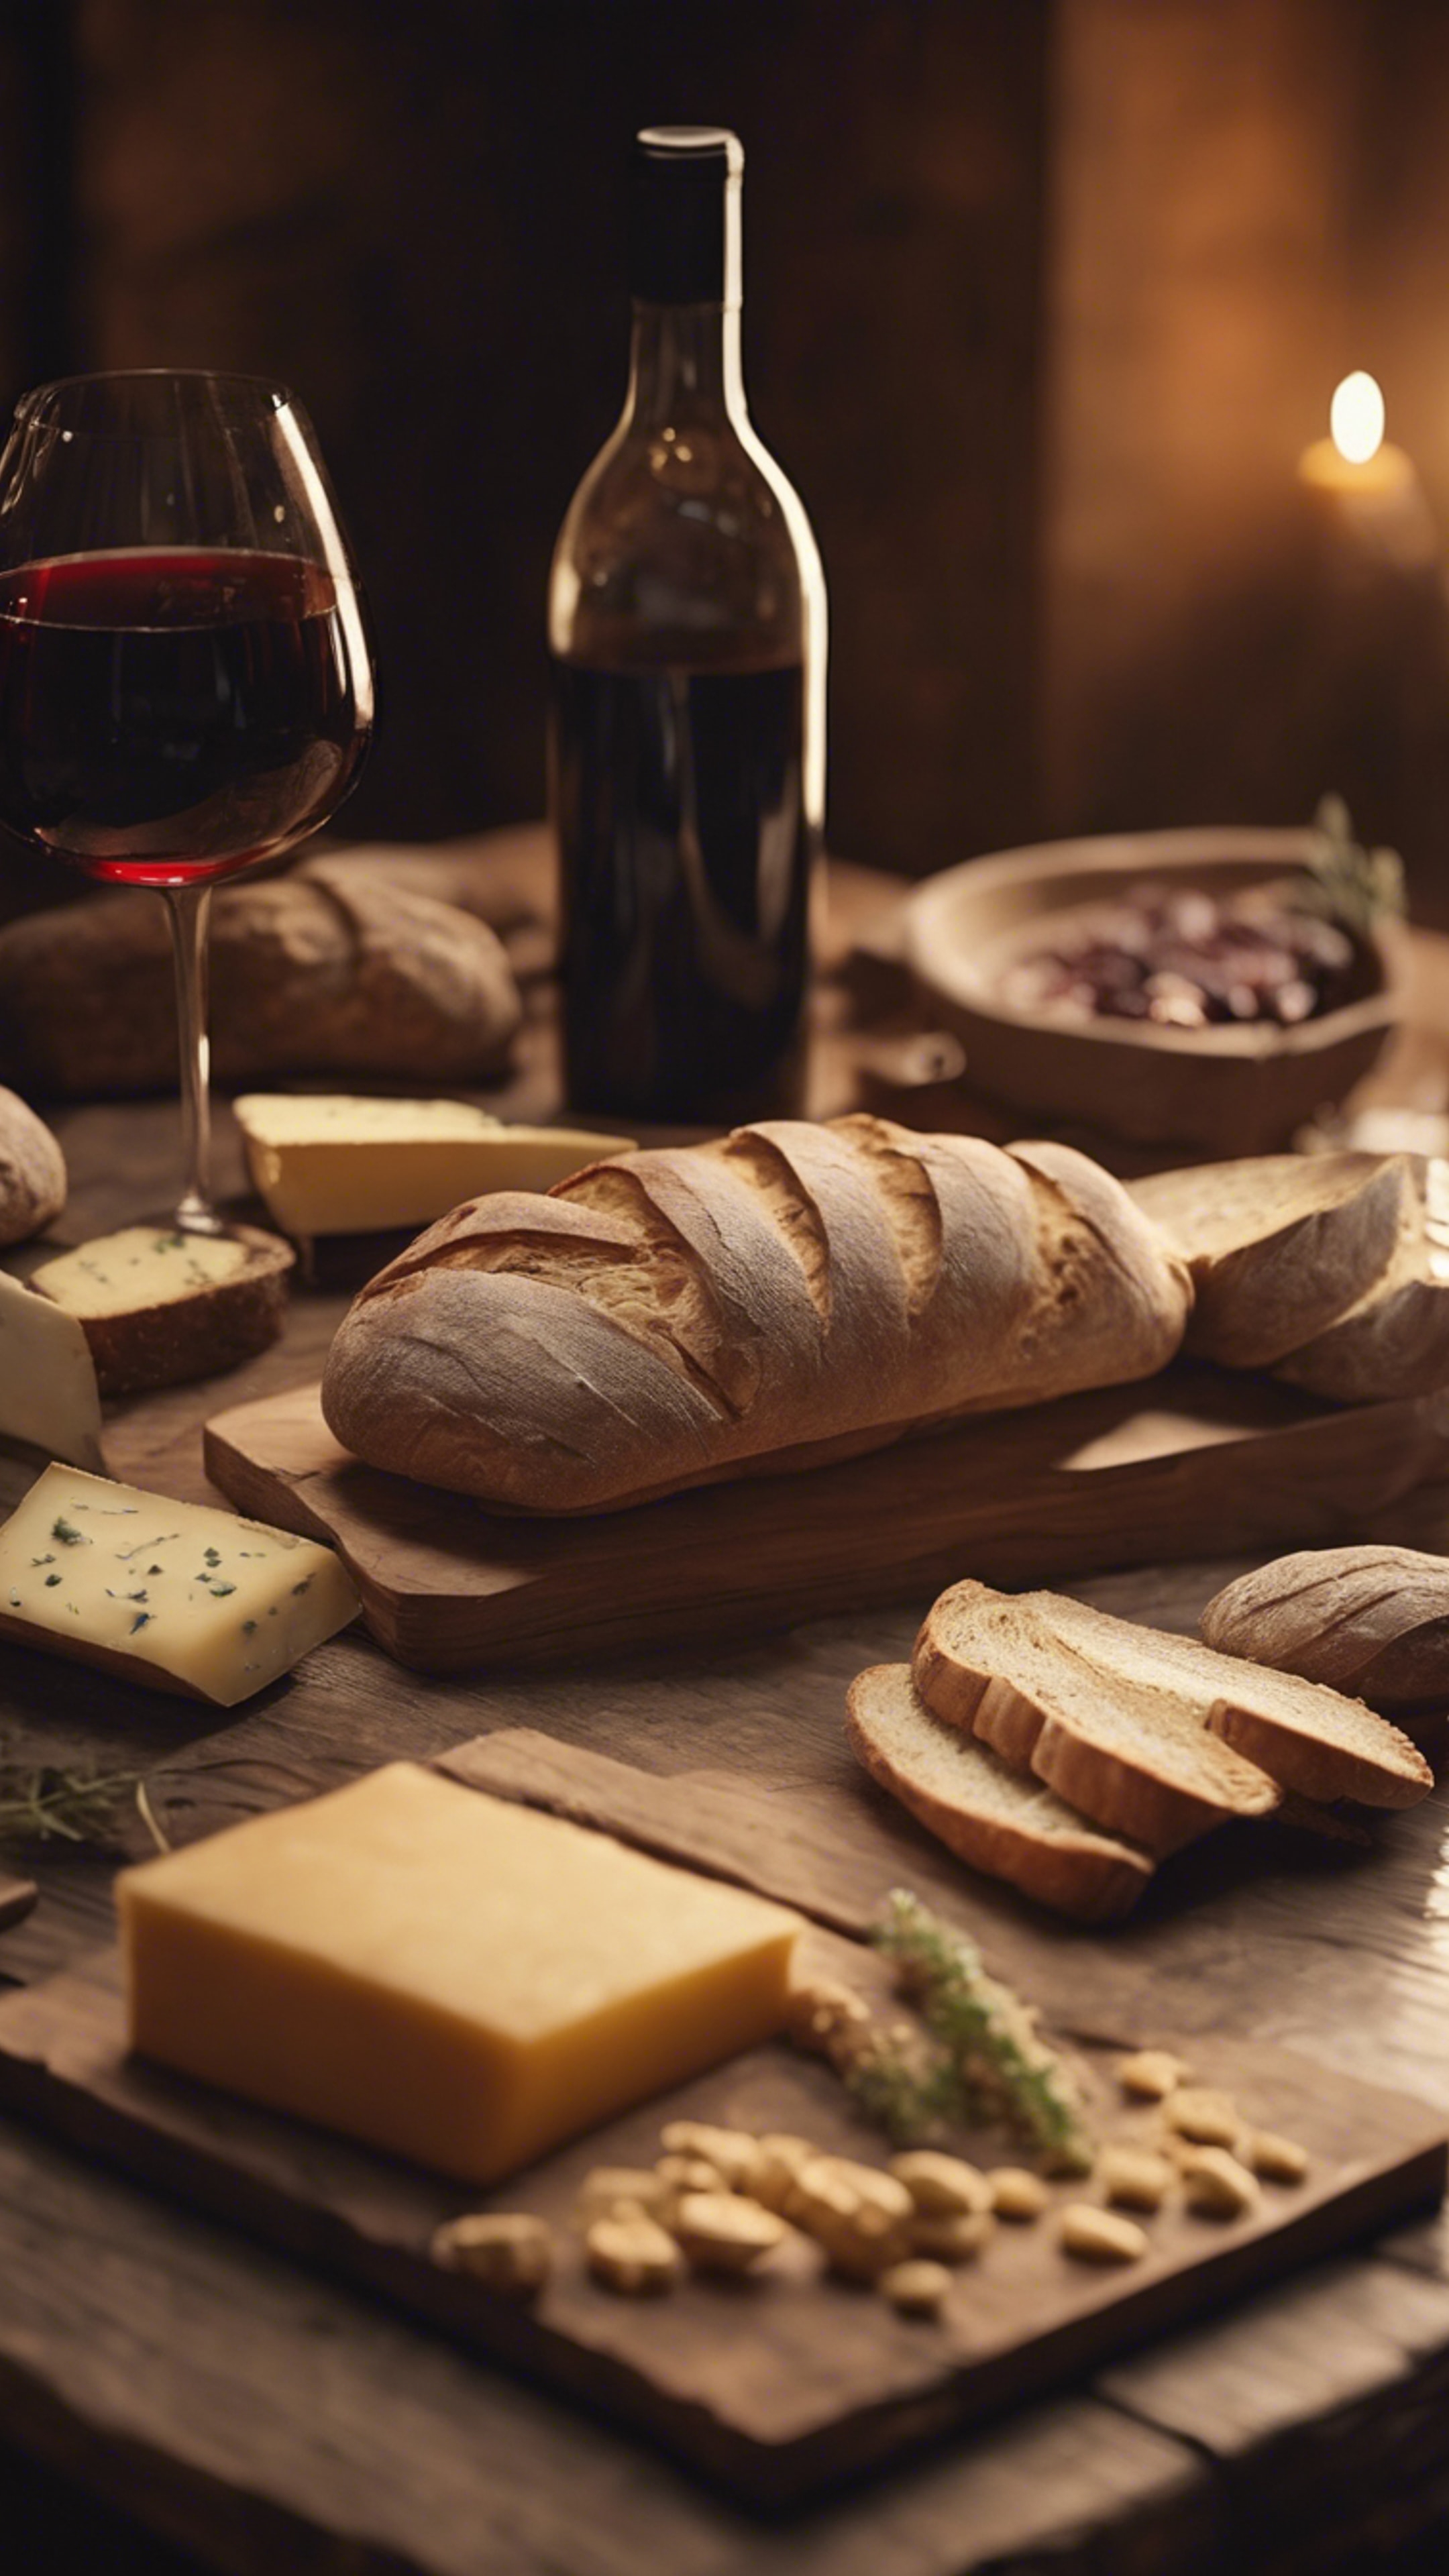 Detailed close-up of a rustic French country-style wooden table set with fresh bread, wine, and cheese under warm interior lighting. Tapet[6a74bb7d88b74d998281]